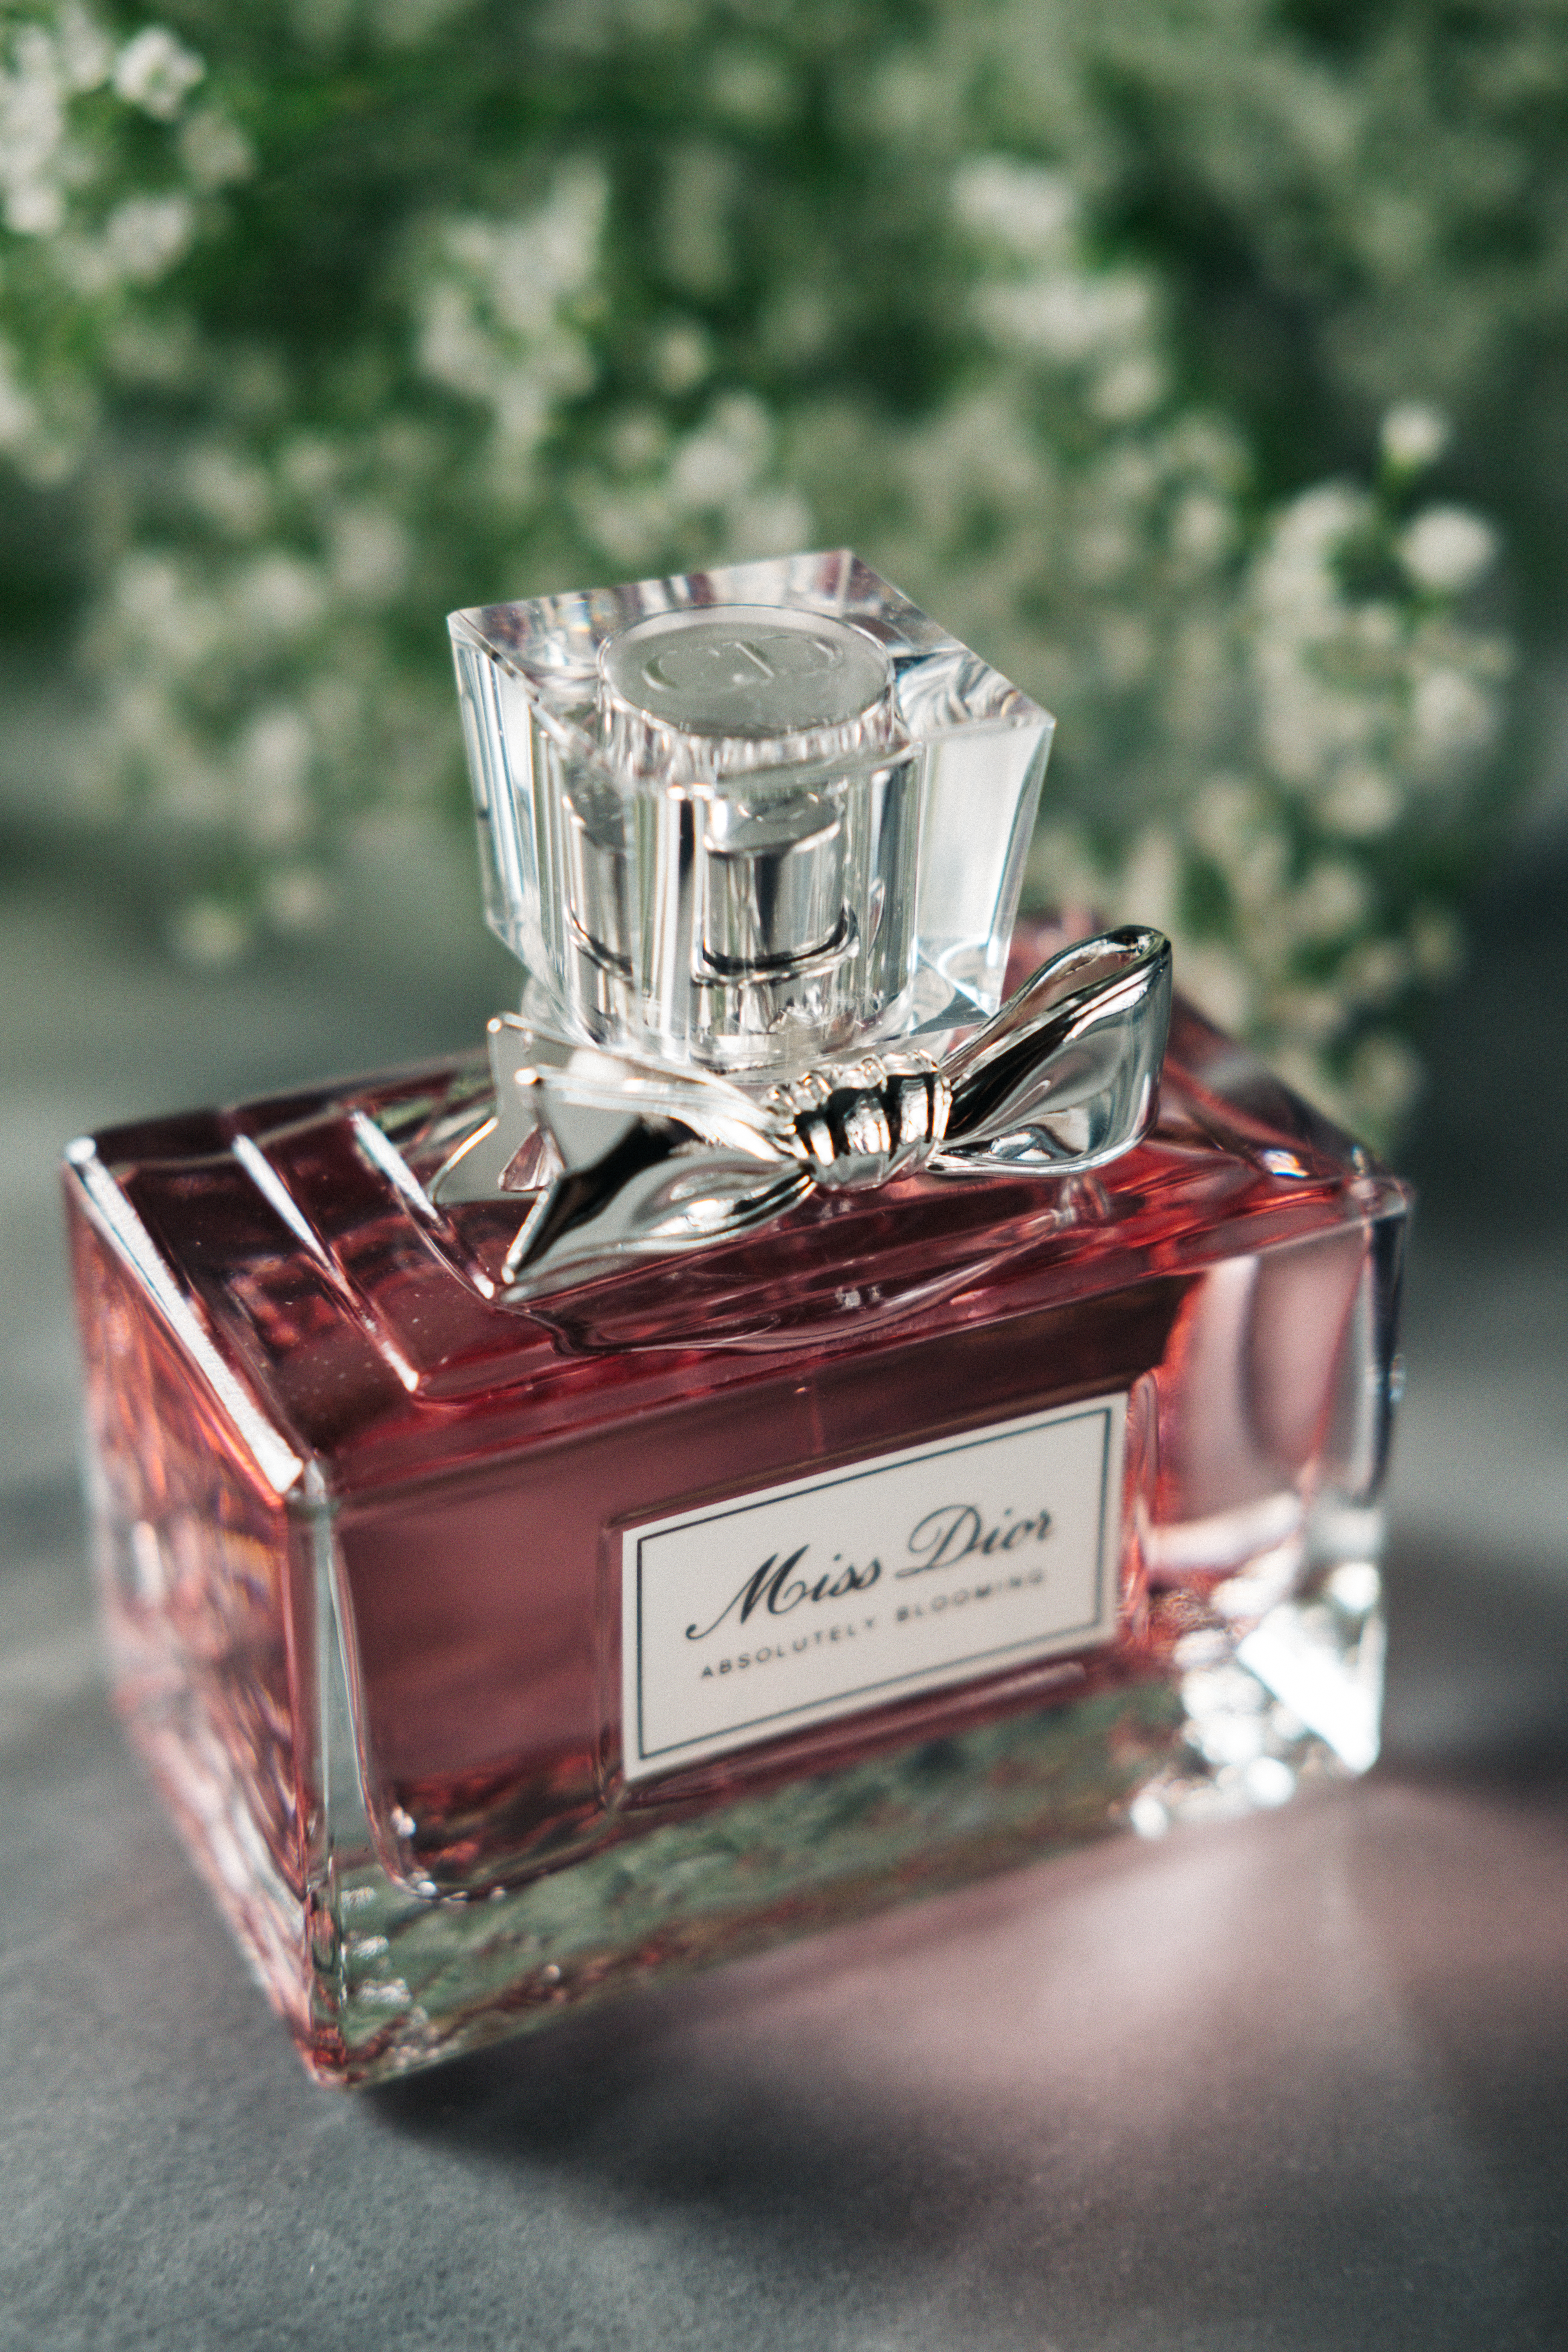 Dior Miss Dior Blooming Bouquet Perfume